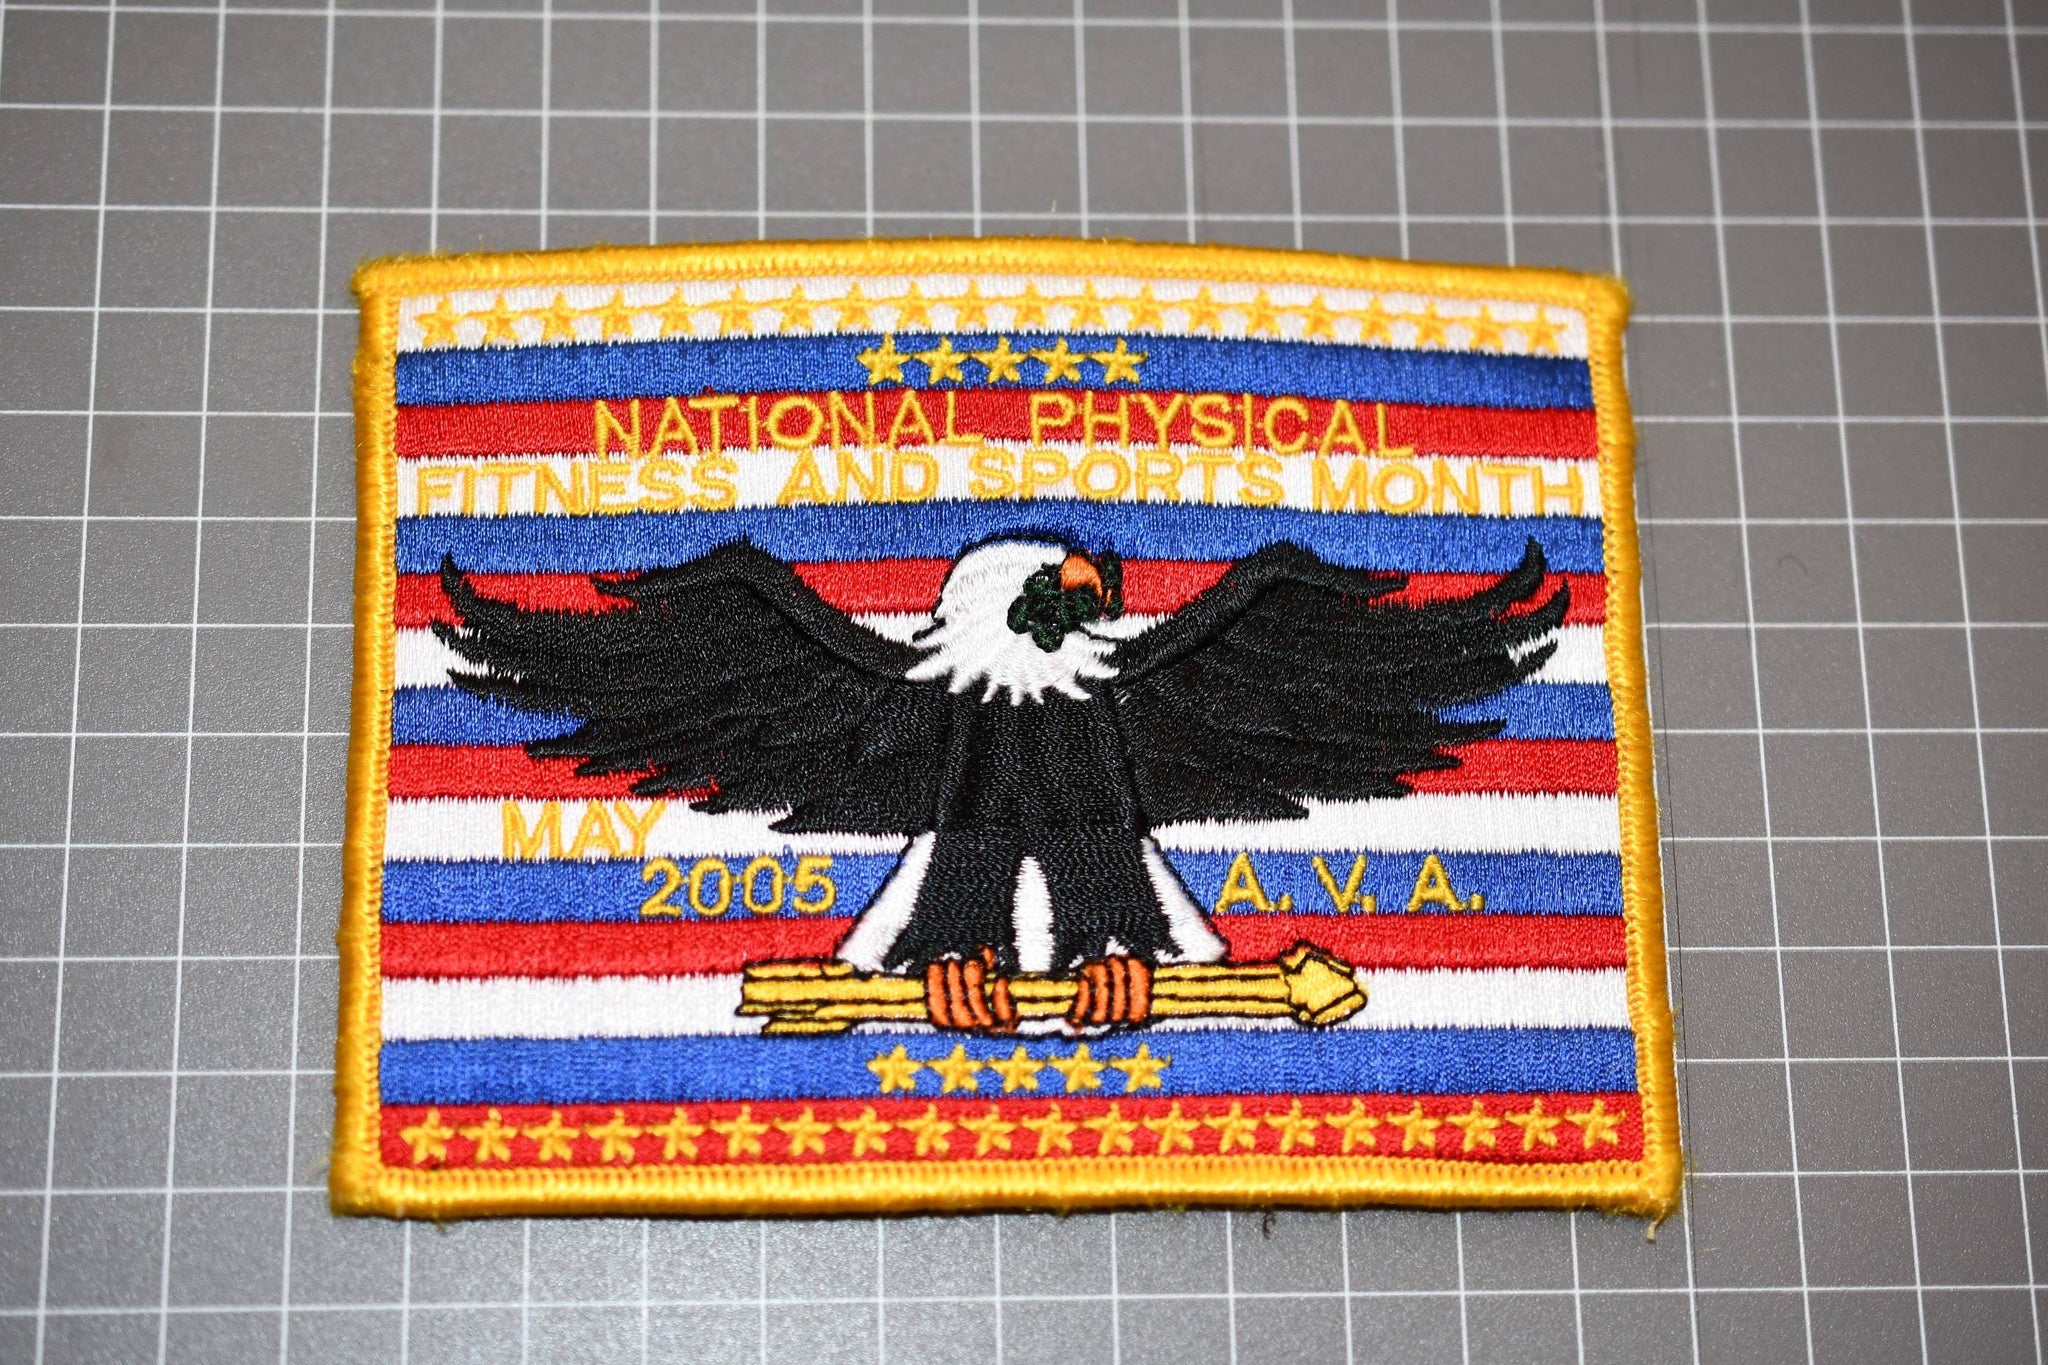 National Physical Fitness And Sports Month - May 2005 A.V.A. (B21-144)